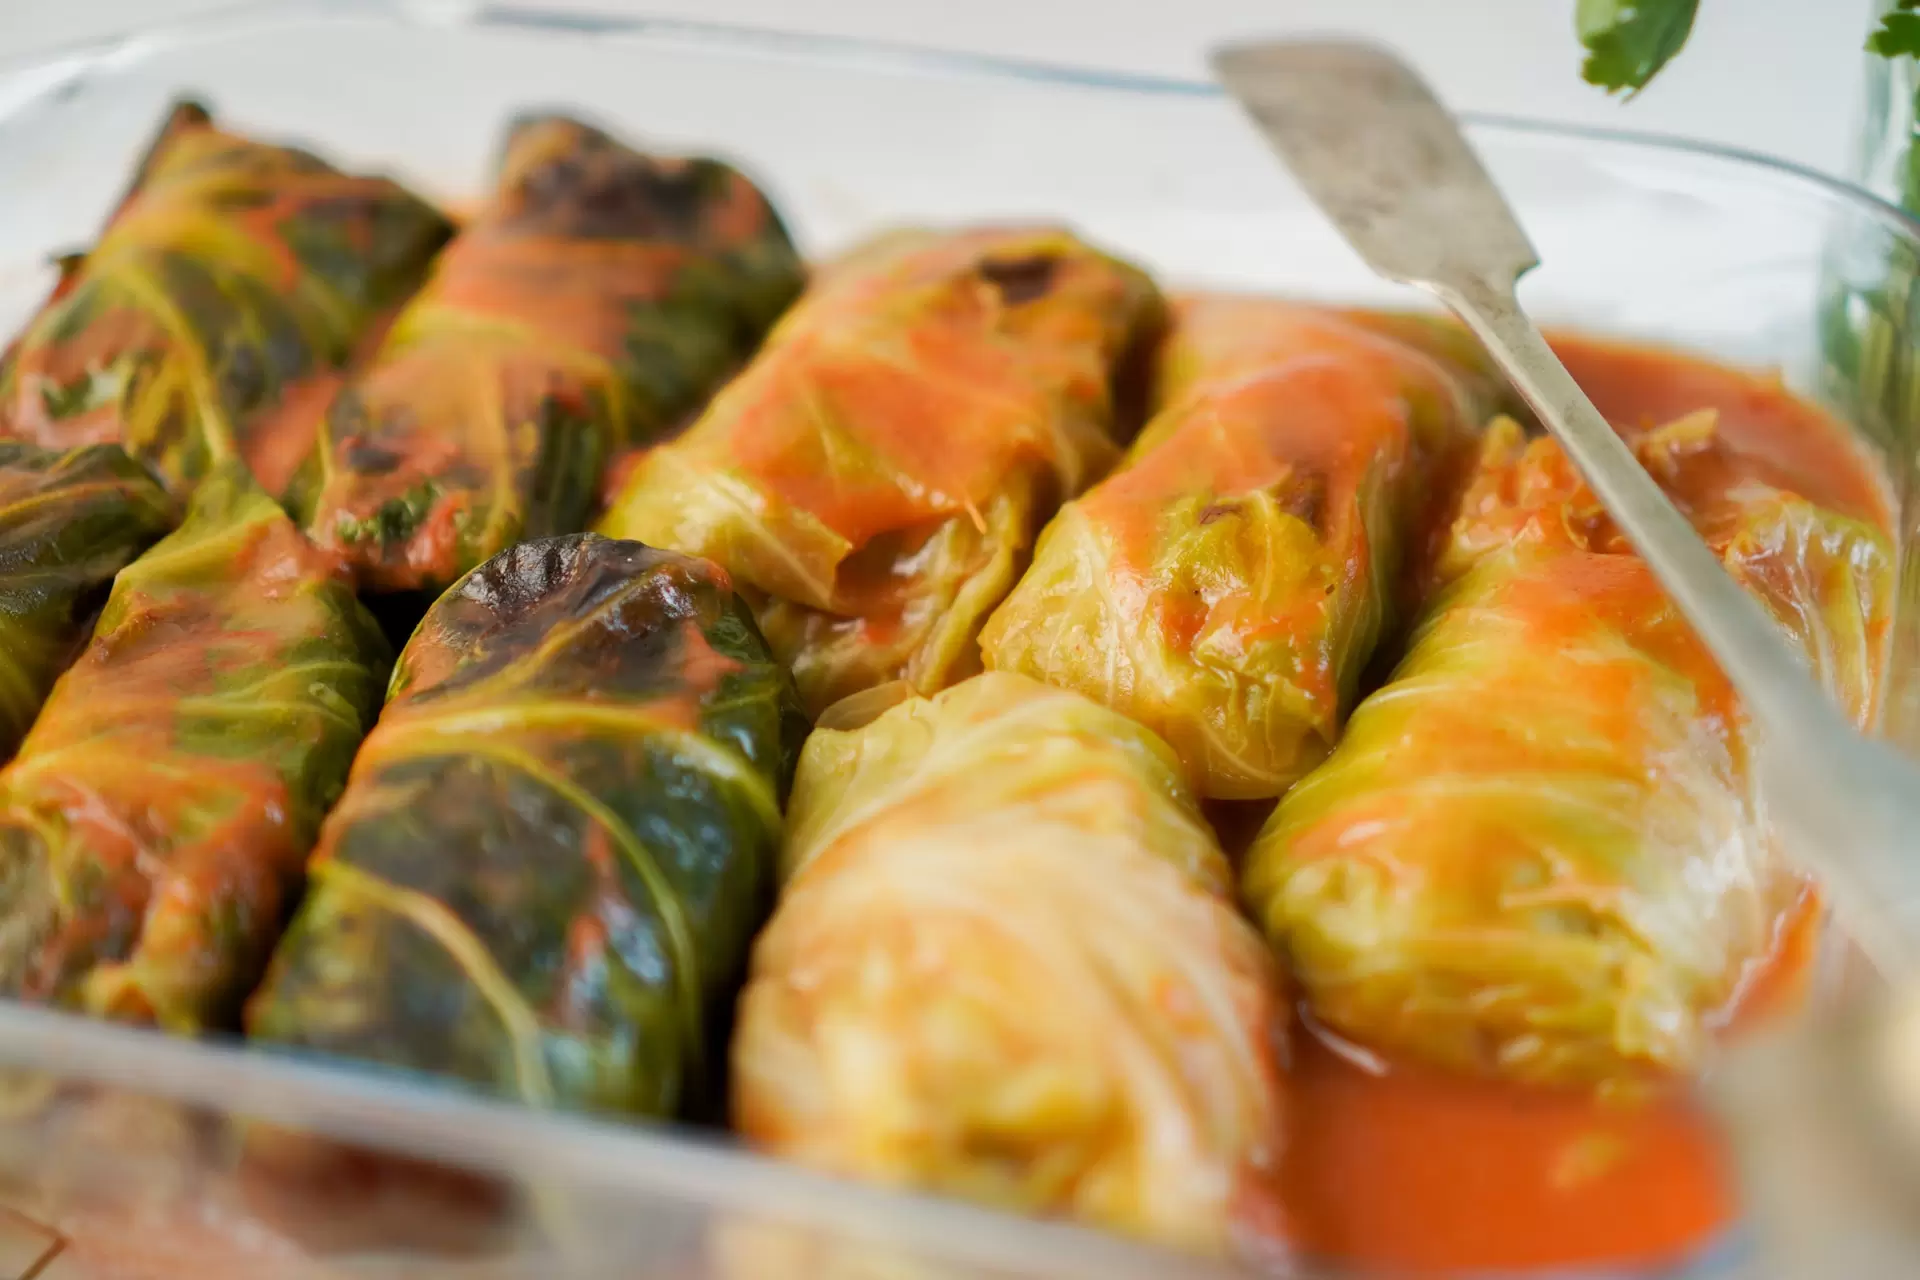 cabbage rolls from a restaurant in Chantilly Virginia